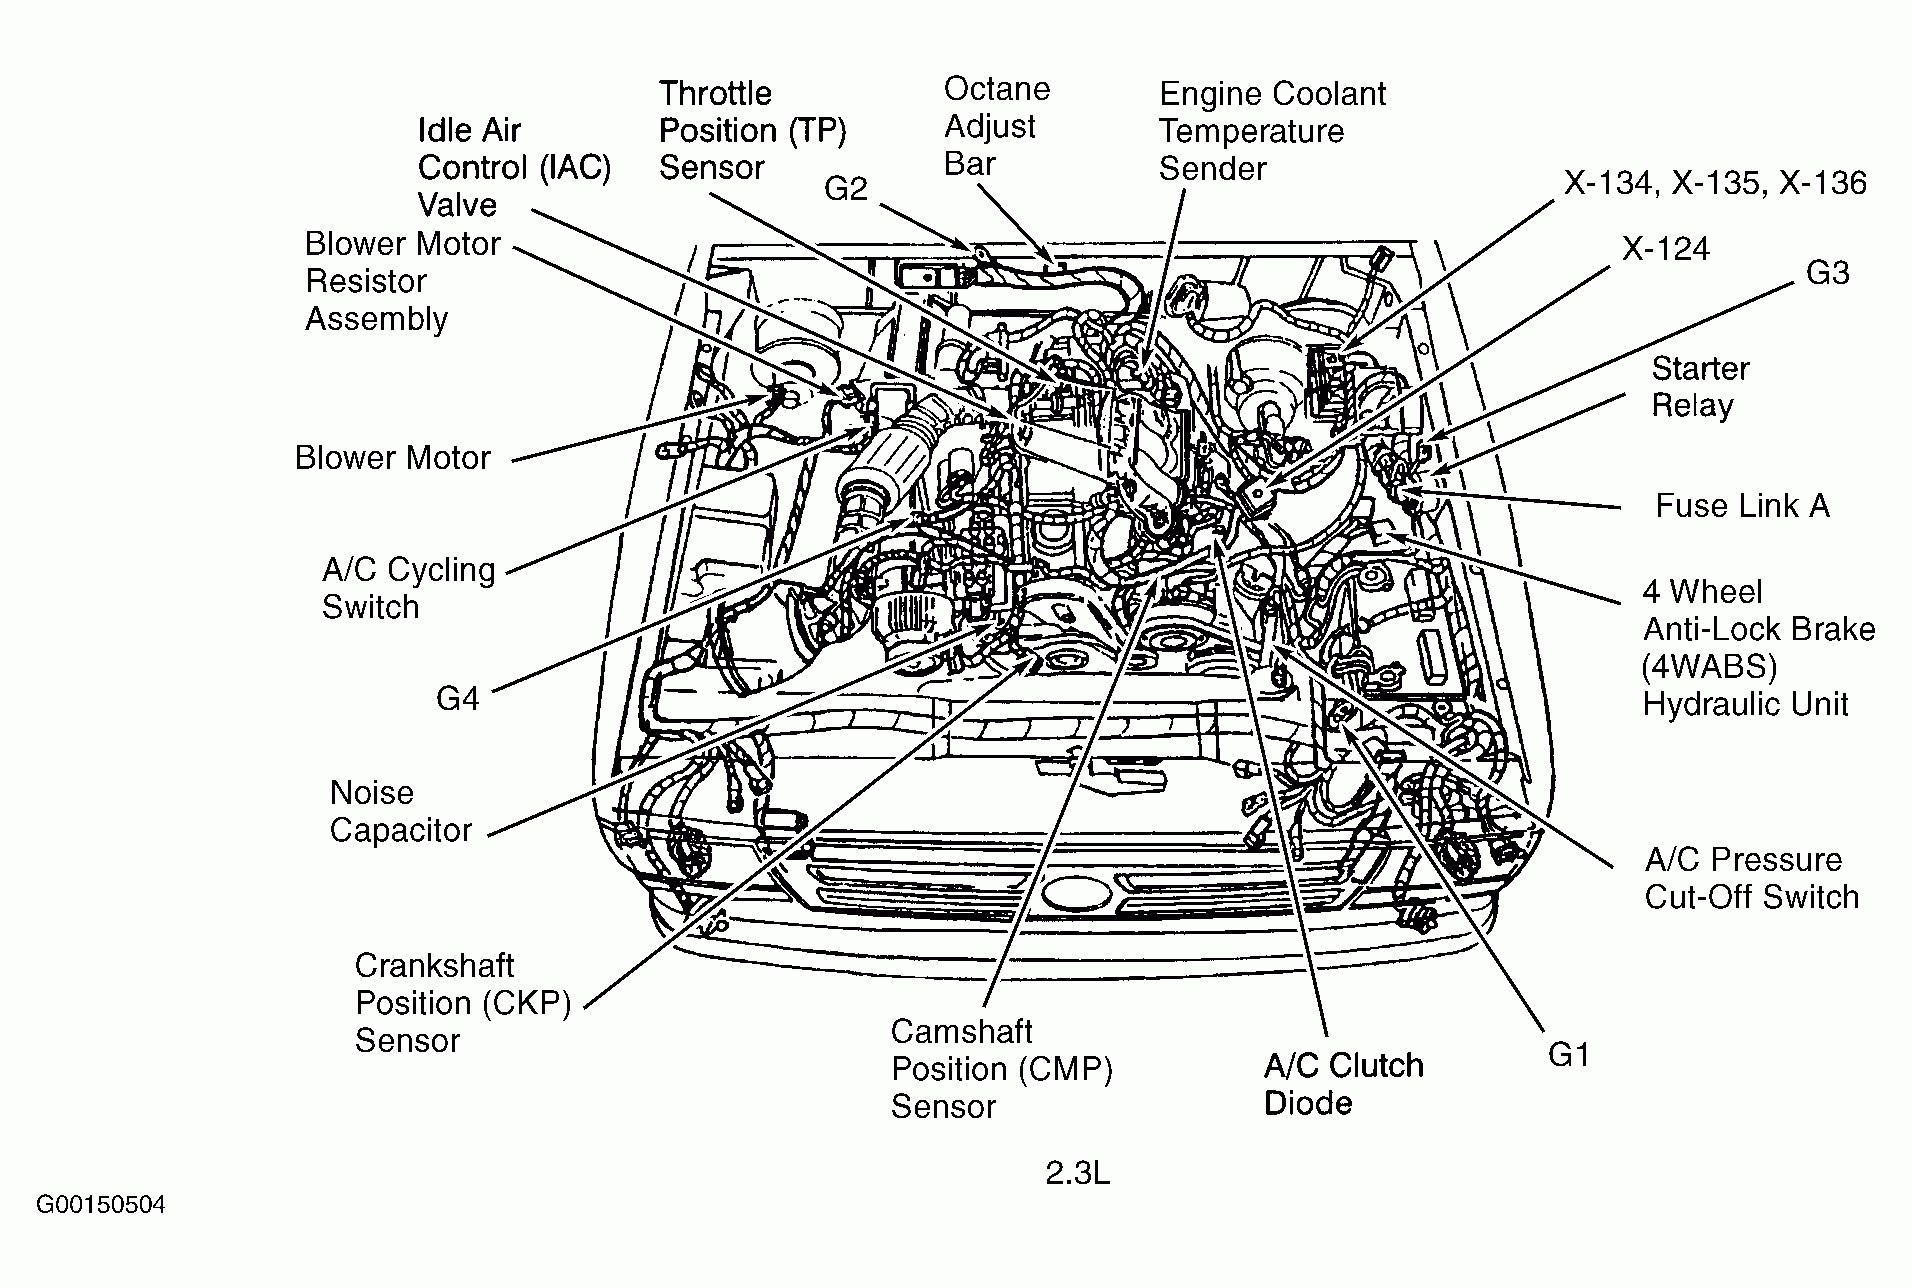 98 ford Ranger Engine Diagram 1995 Mazda B3000 Engine Diagram Simple Guide About Wiring Of 98 ford Ranger Engine Diagram